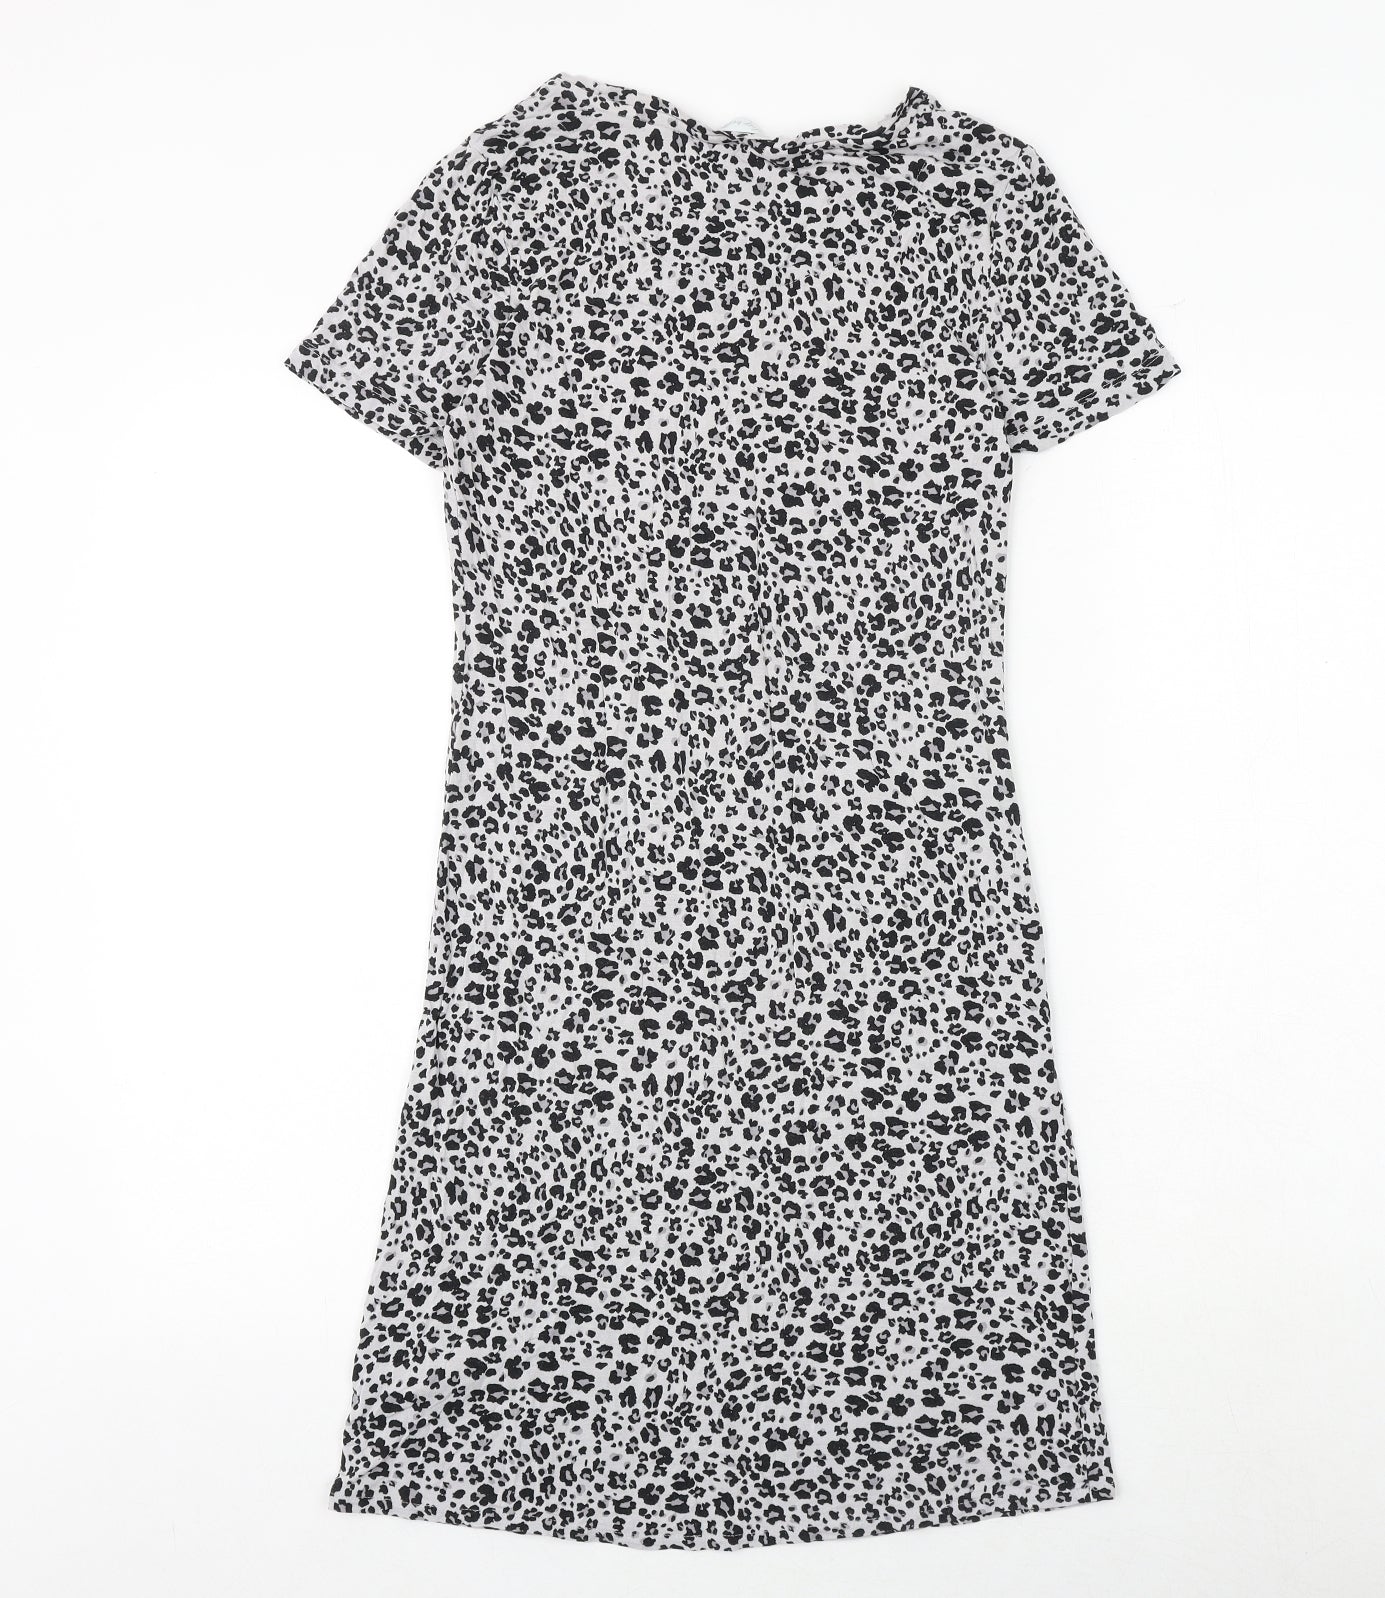 Marks and Spencer Womens Grey Animal Print Viscose Top Dress Size 6 - Leopard Print